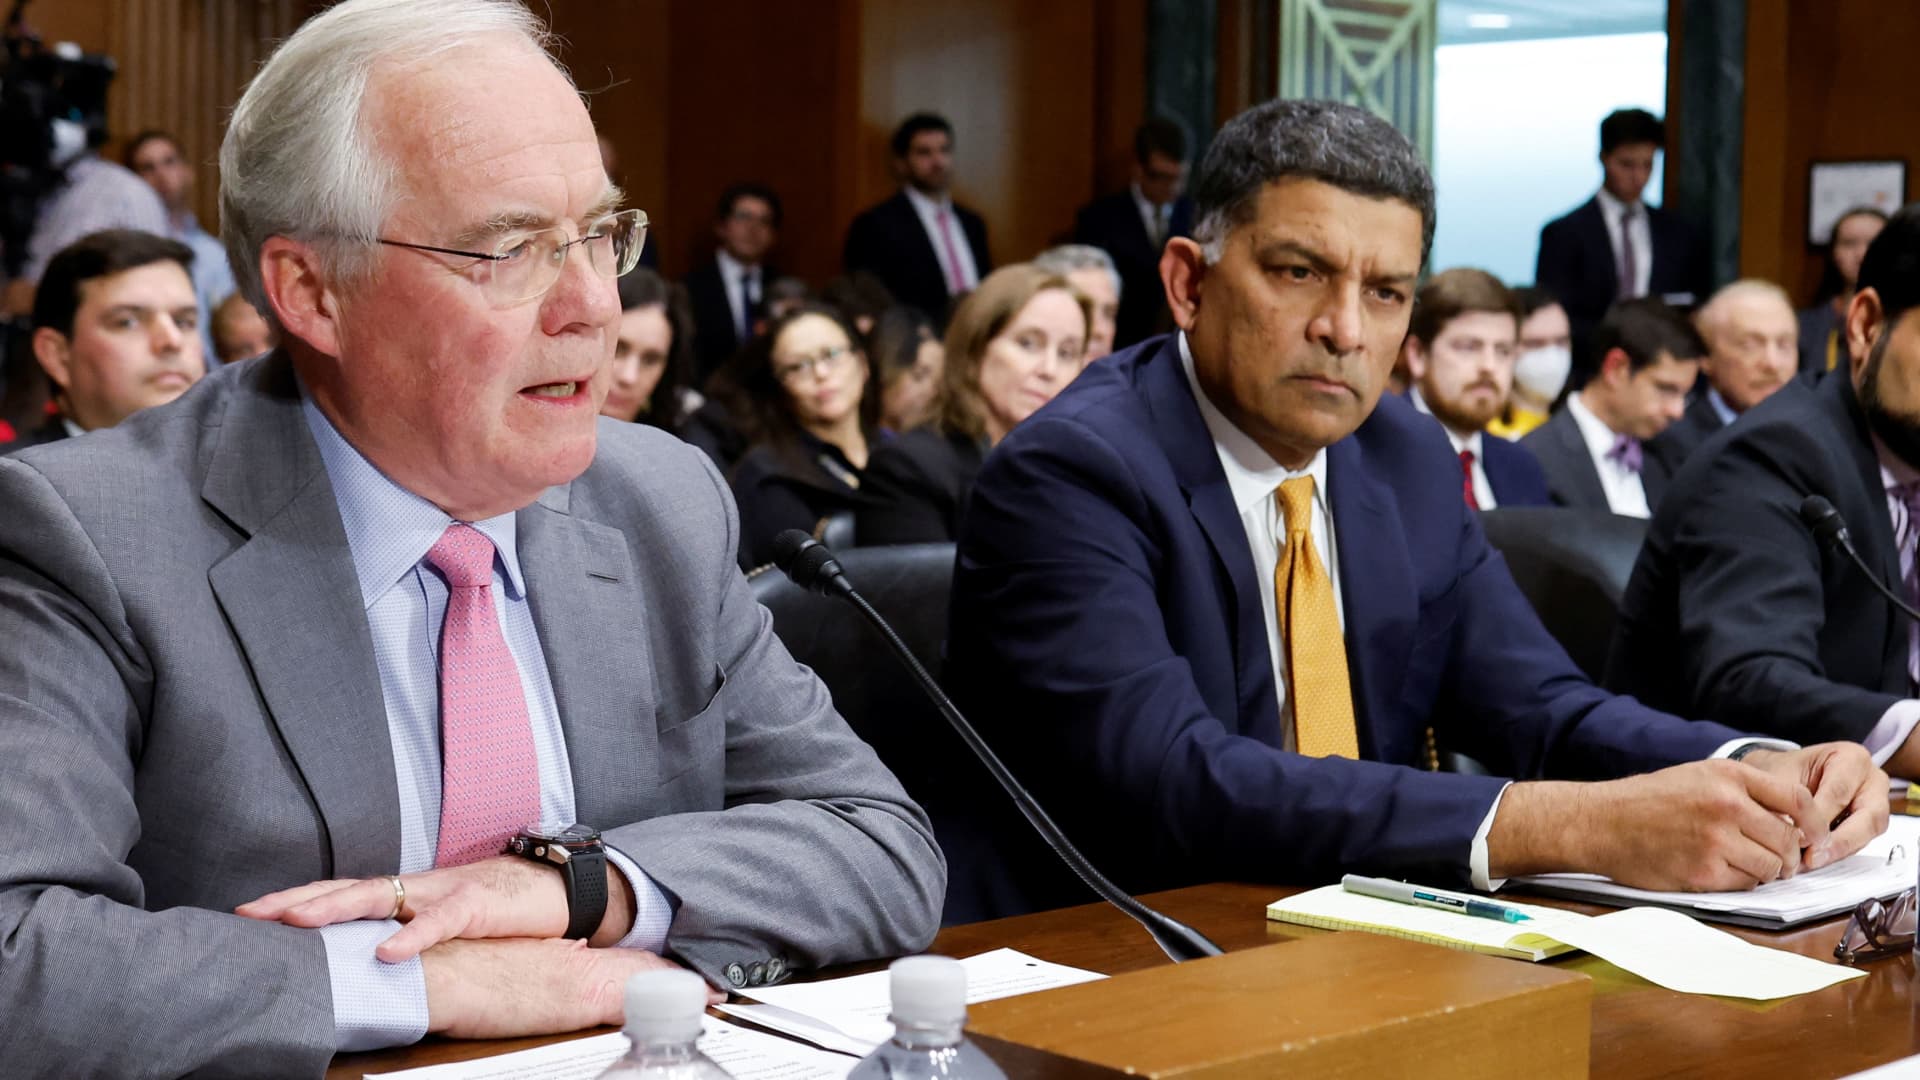 Kroger CEO Rodney McMullen and Albertsons CEO Vivek Sankaran testify about their proposed massive grocery store merger at a Senate Judiciary Committee Competition Policy, Antitrust, and Consumer Rights Subcommittee hearing on Capitol Hill in Washington, November 29, 2022.